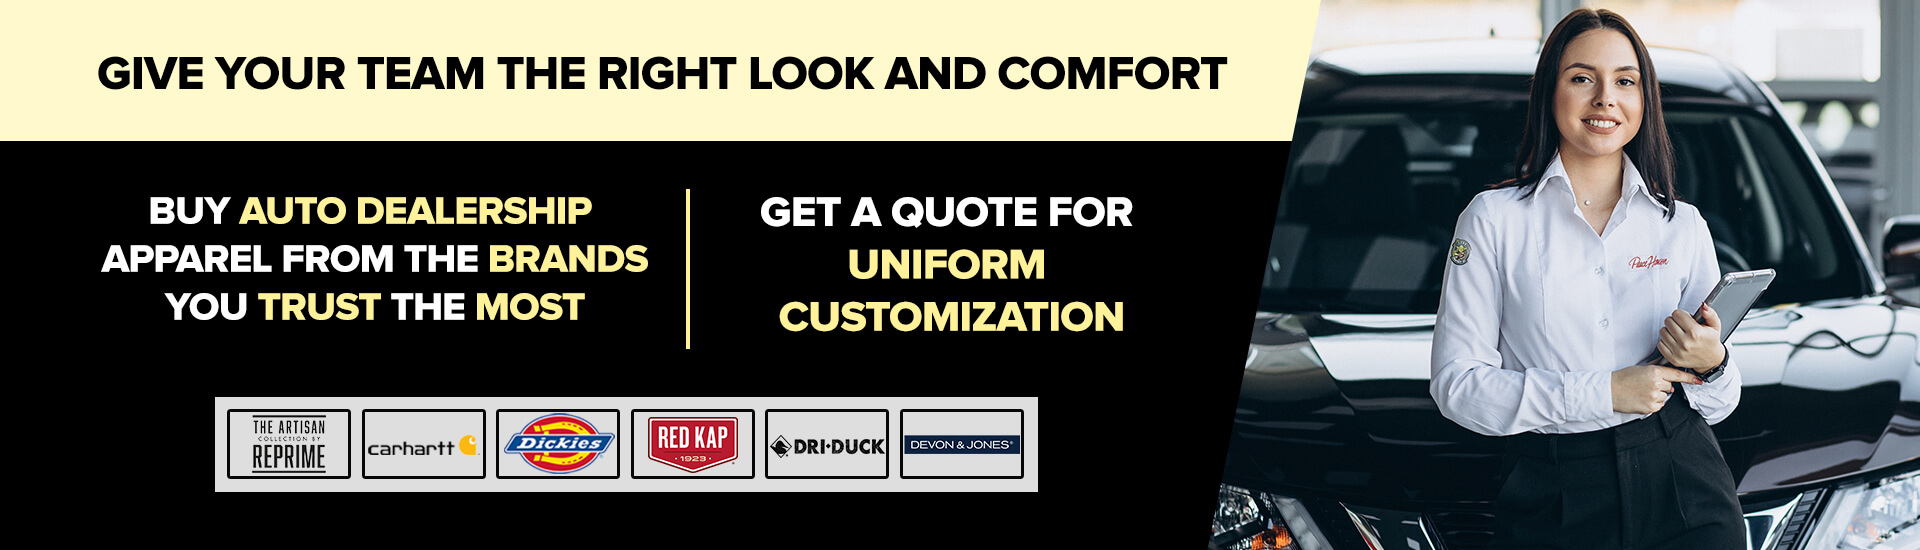 Give Your Team the Right Look & Comfort